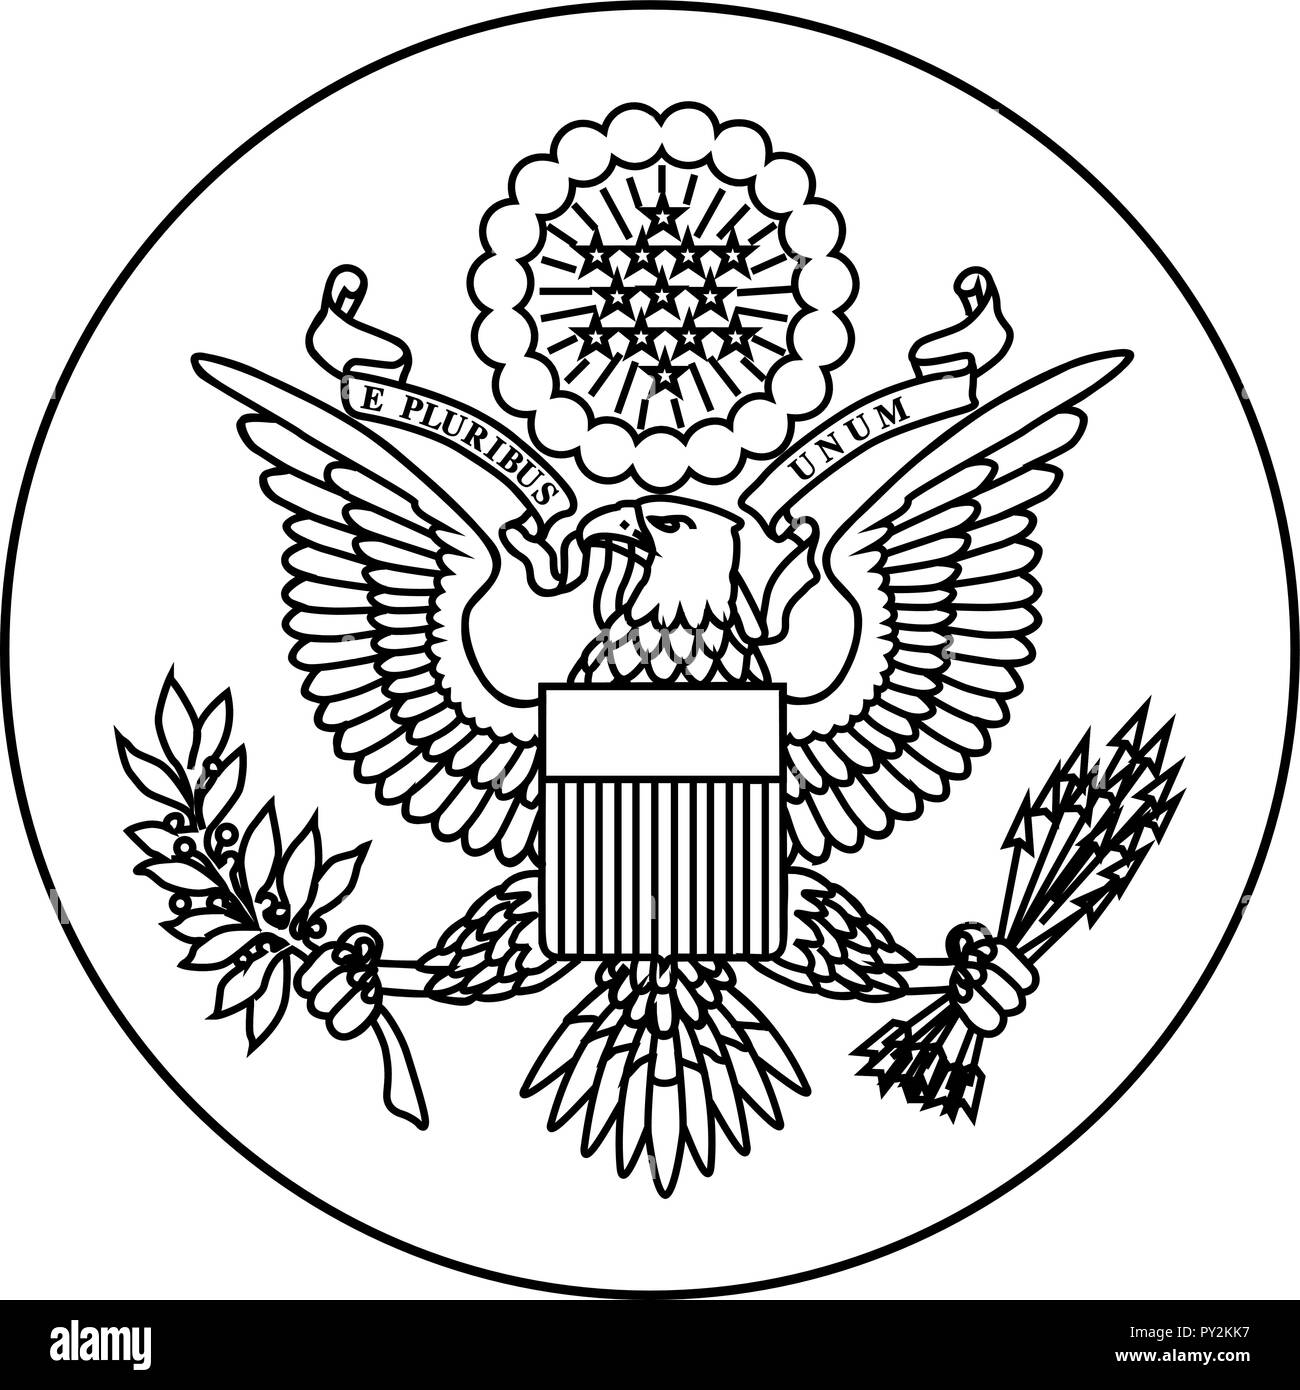 Symbol of United States. Black and white emblem Stock Vector